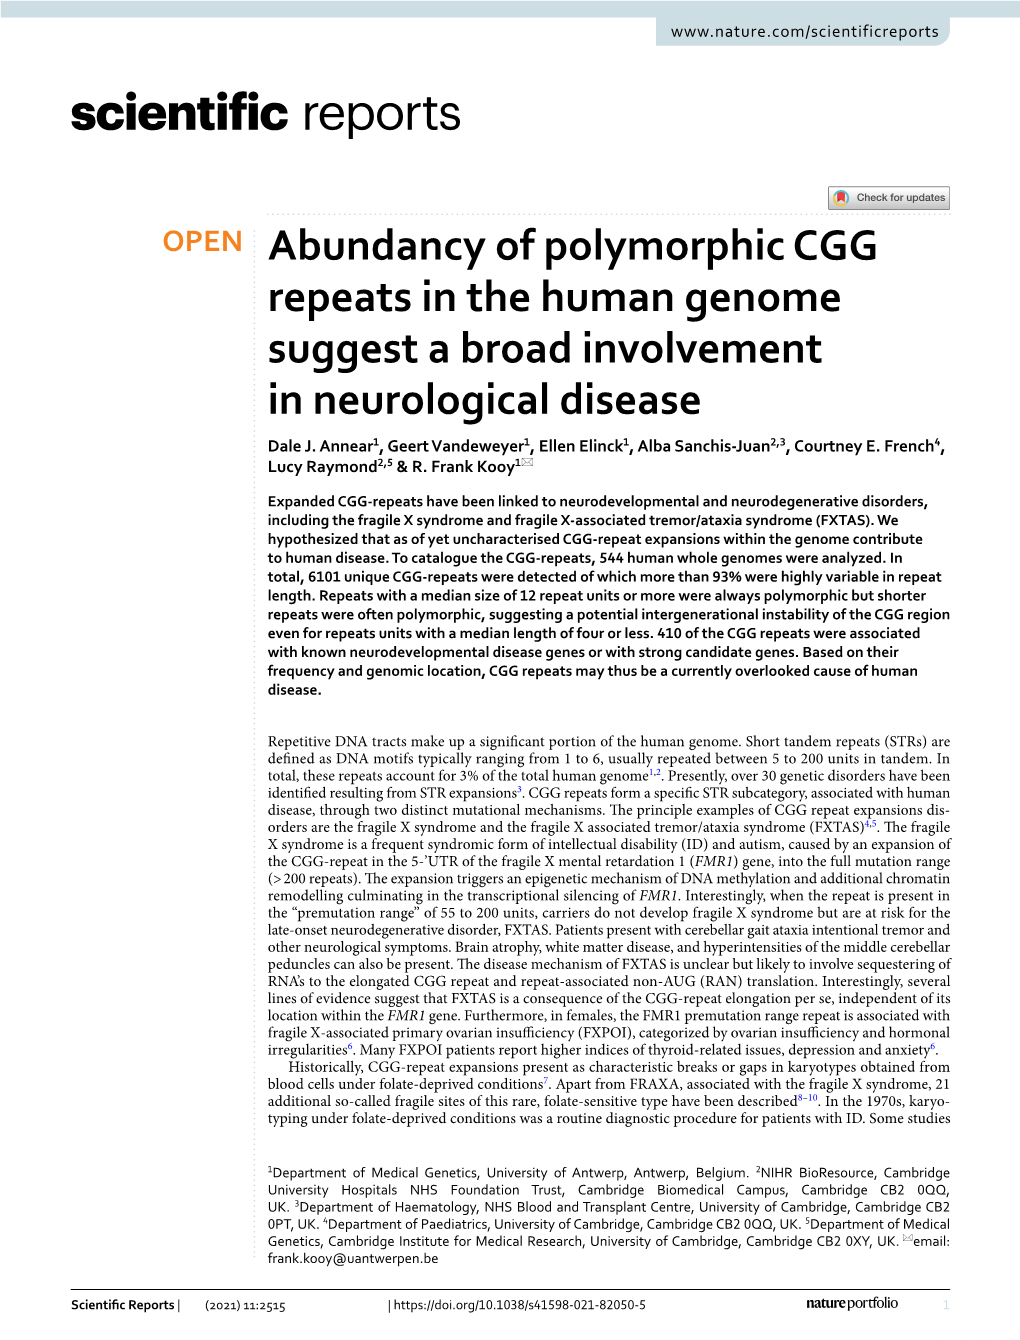 Abundancy of Polymorphic CGG Repeats in the Human Genome Suggest a Broad Involvement in Neurological Disease Dale J